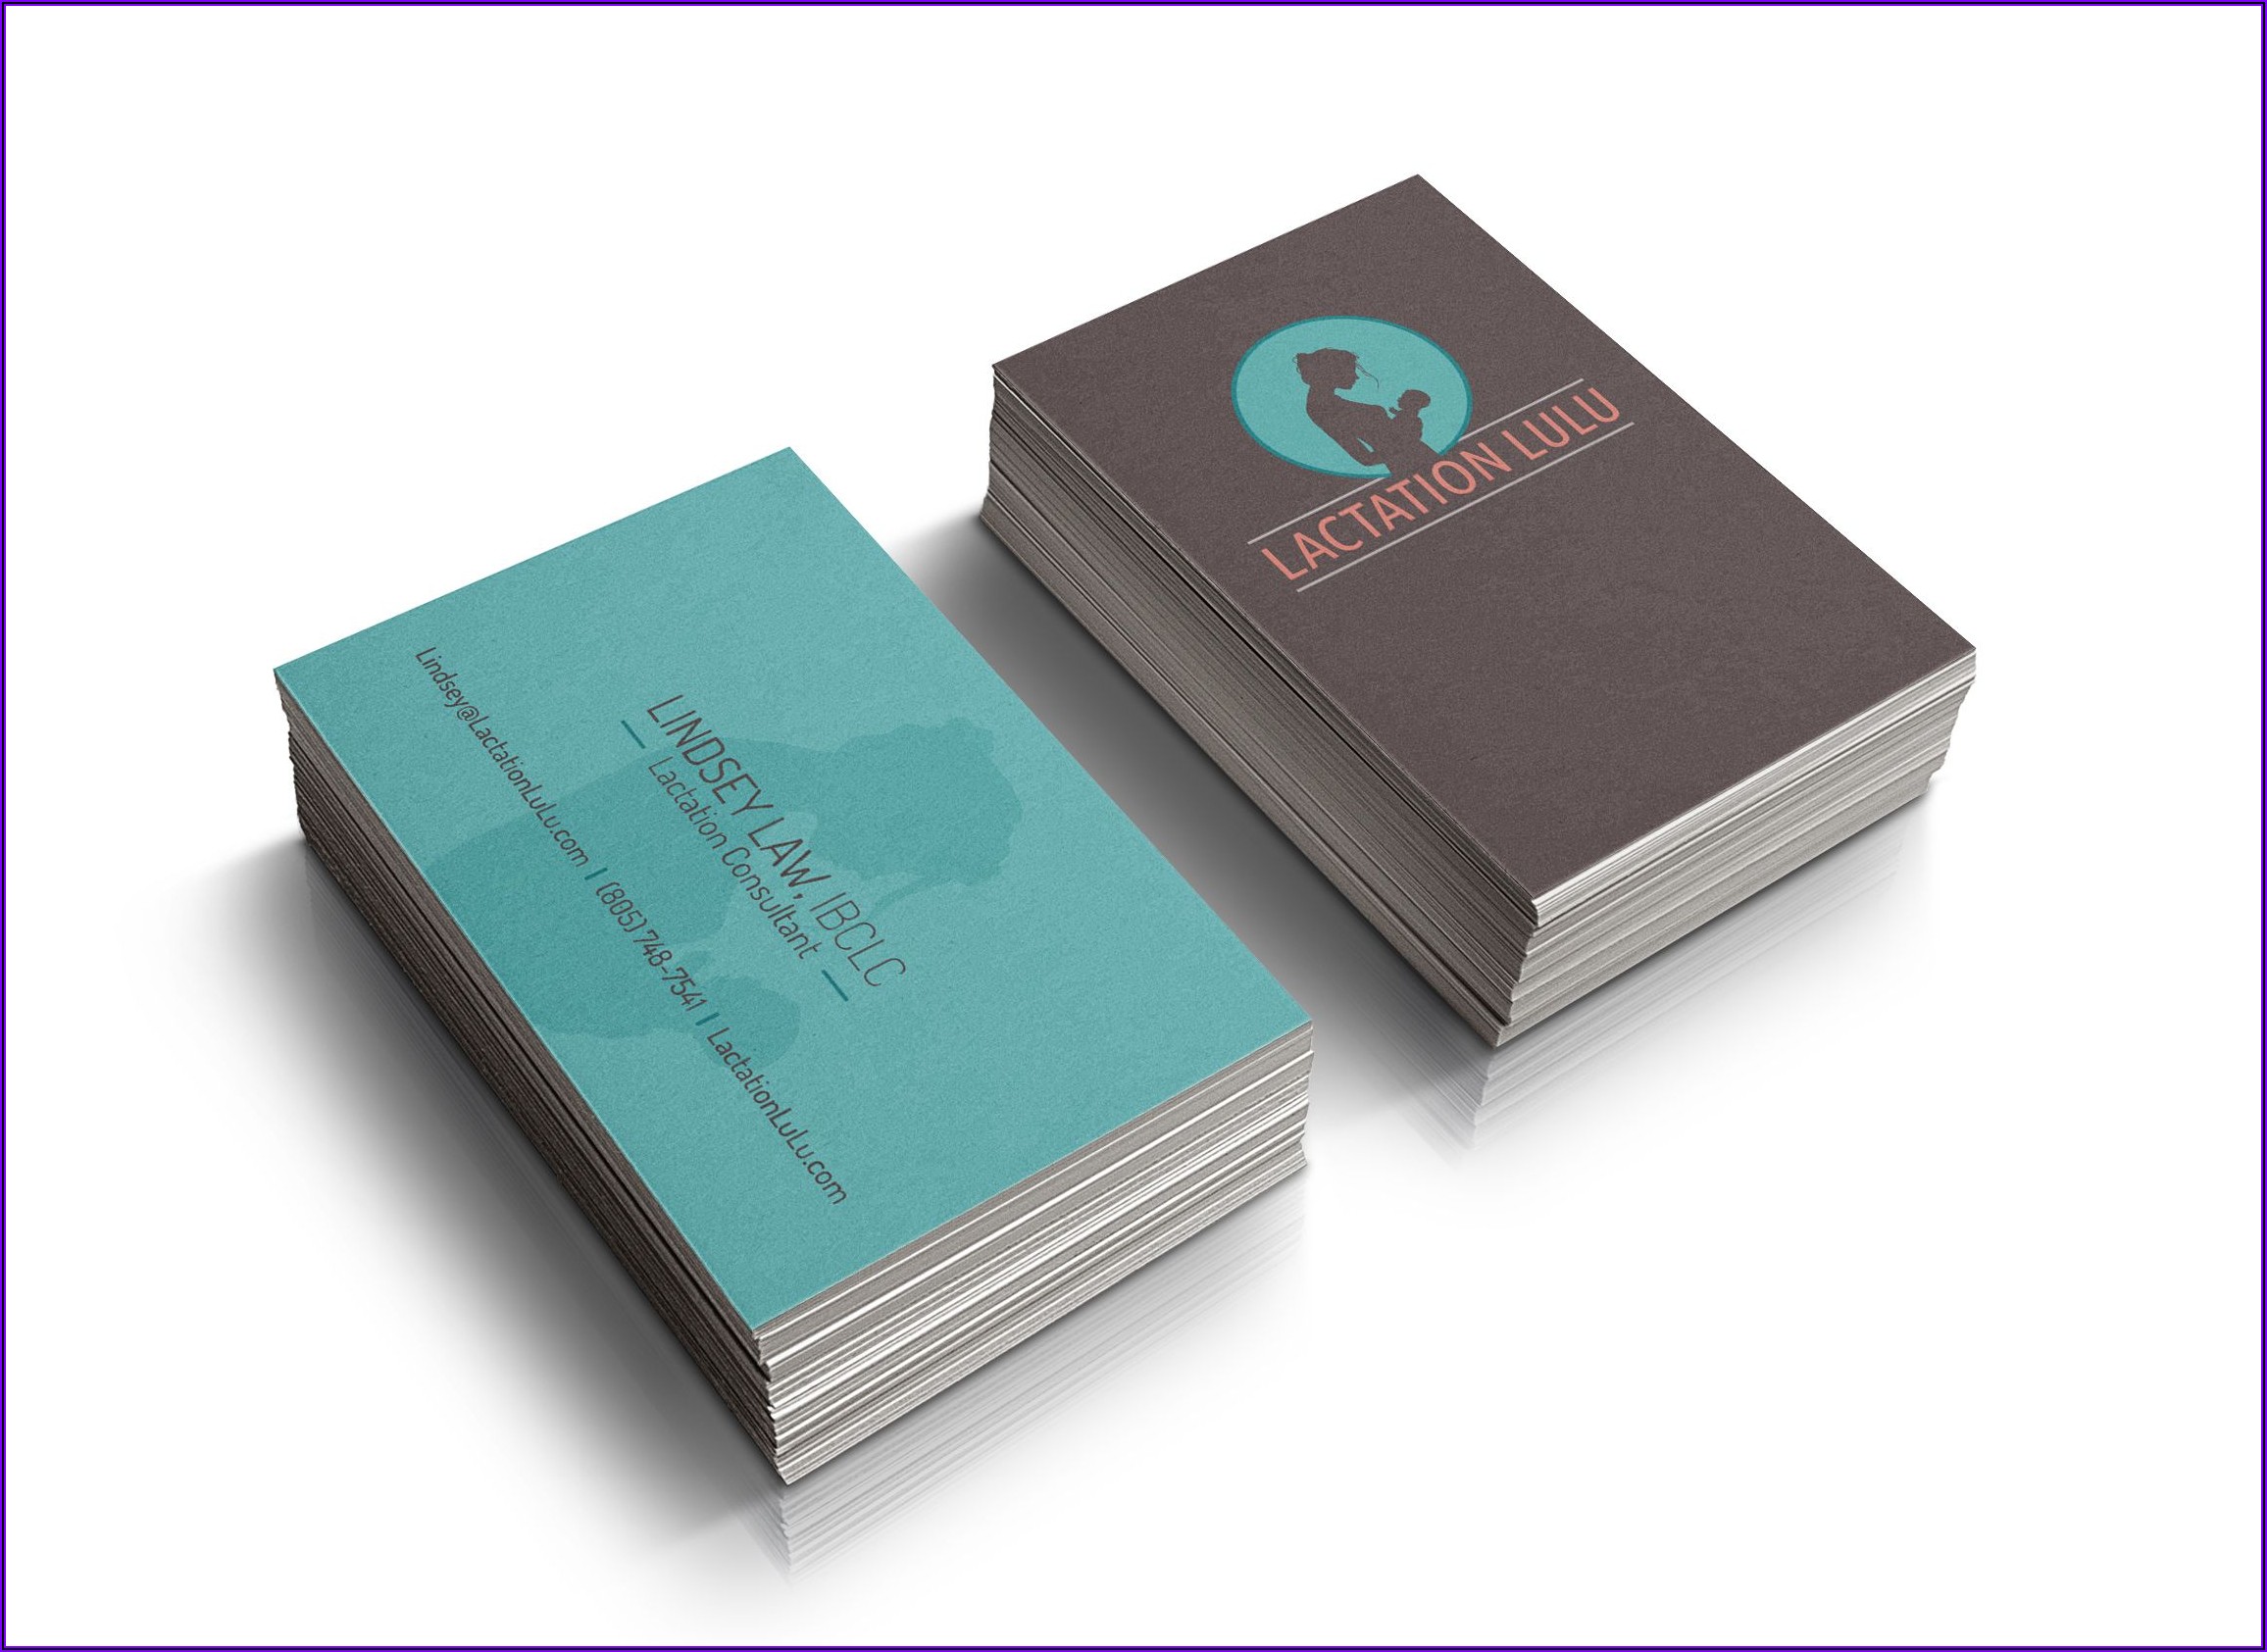 Lactation Consultant Business Cards